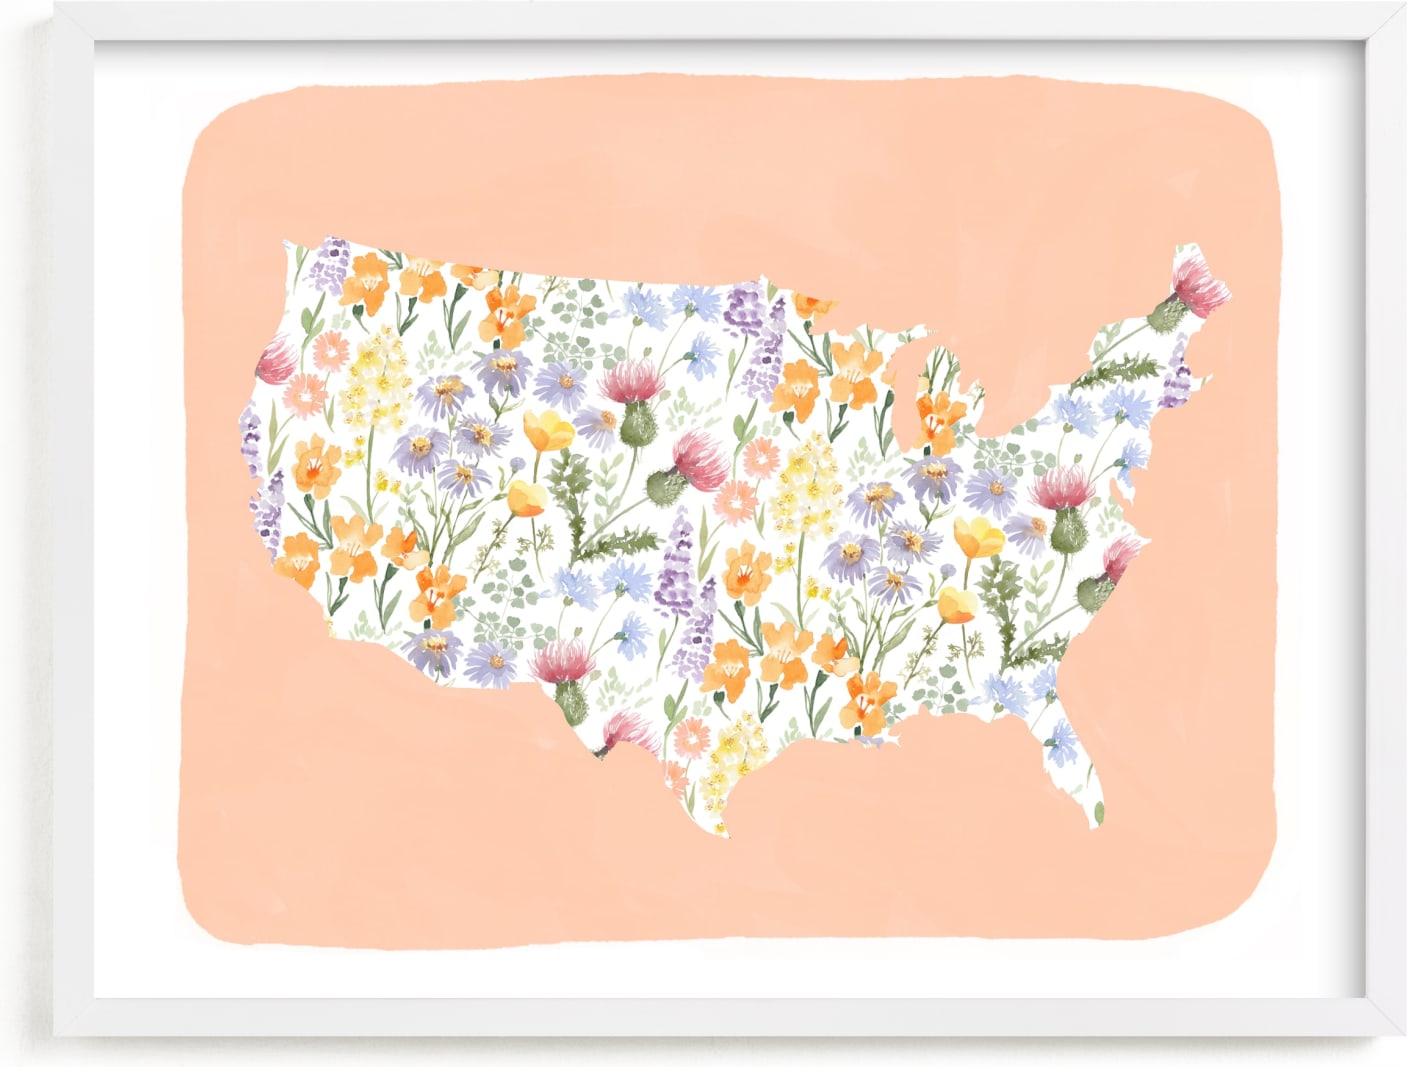 This is a white kids wall art by Sara Berrenson called She's a Wildflower.